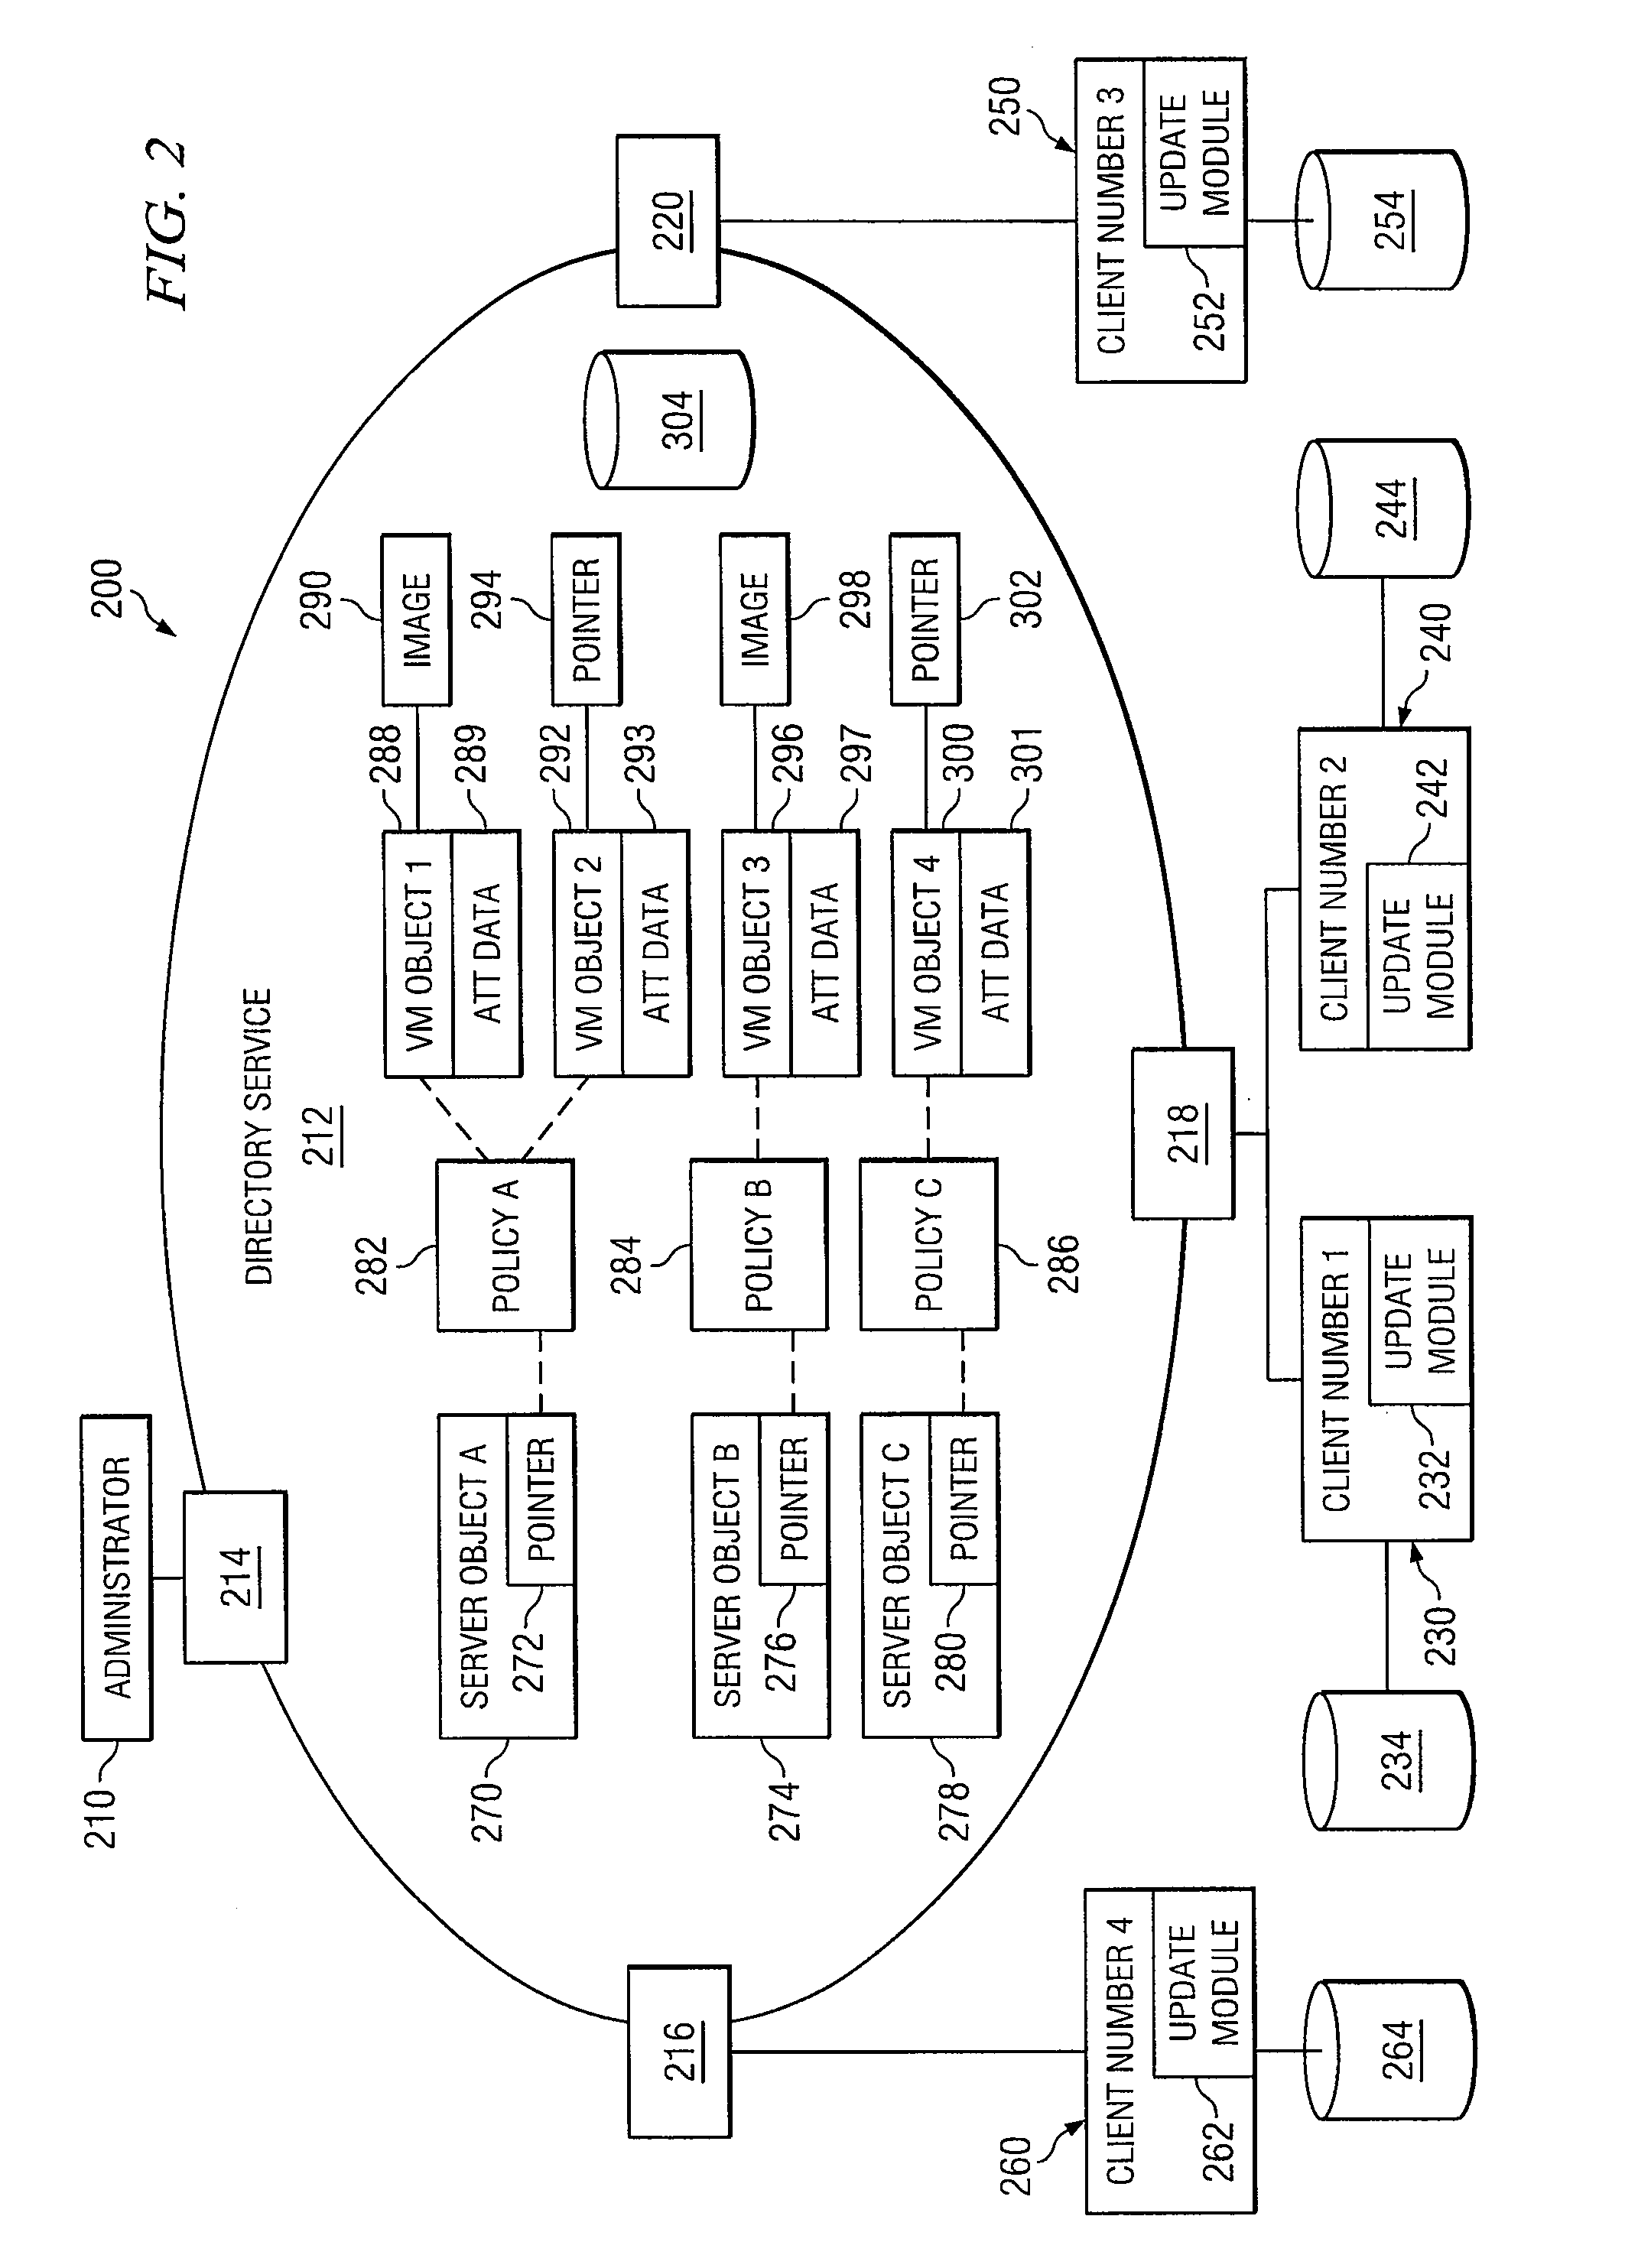 Method and system of configuring a directory service for installing software applications